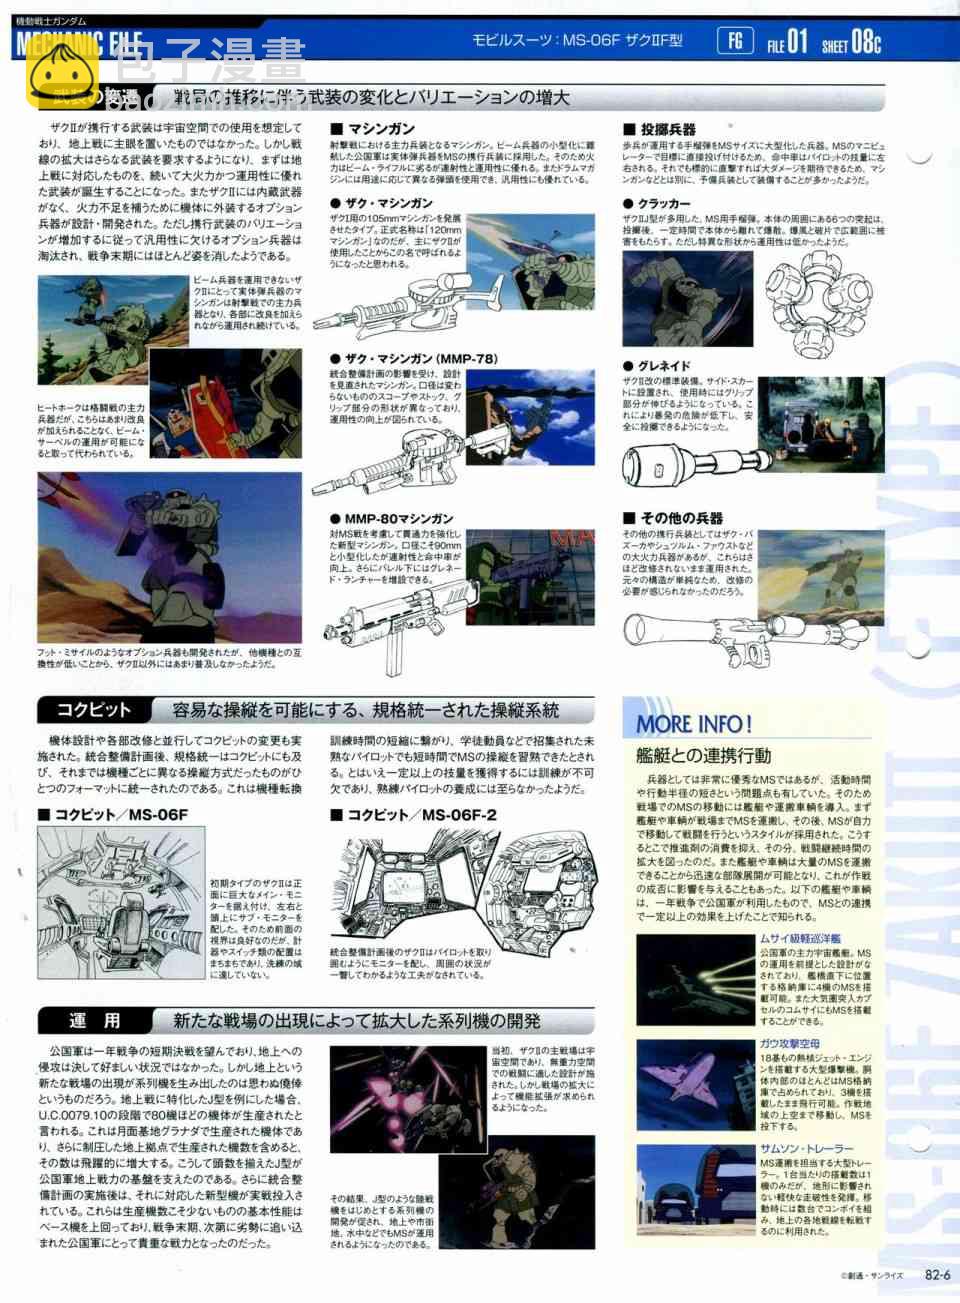 The Official Gundam Perfect File  - 第81-90話(1/7) - 1